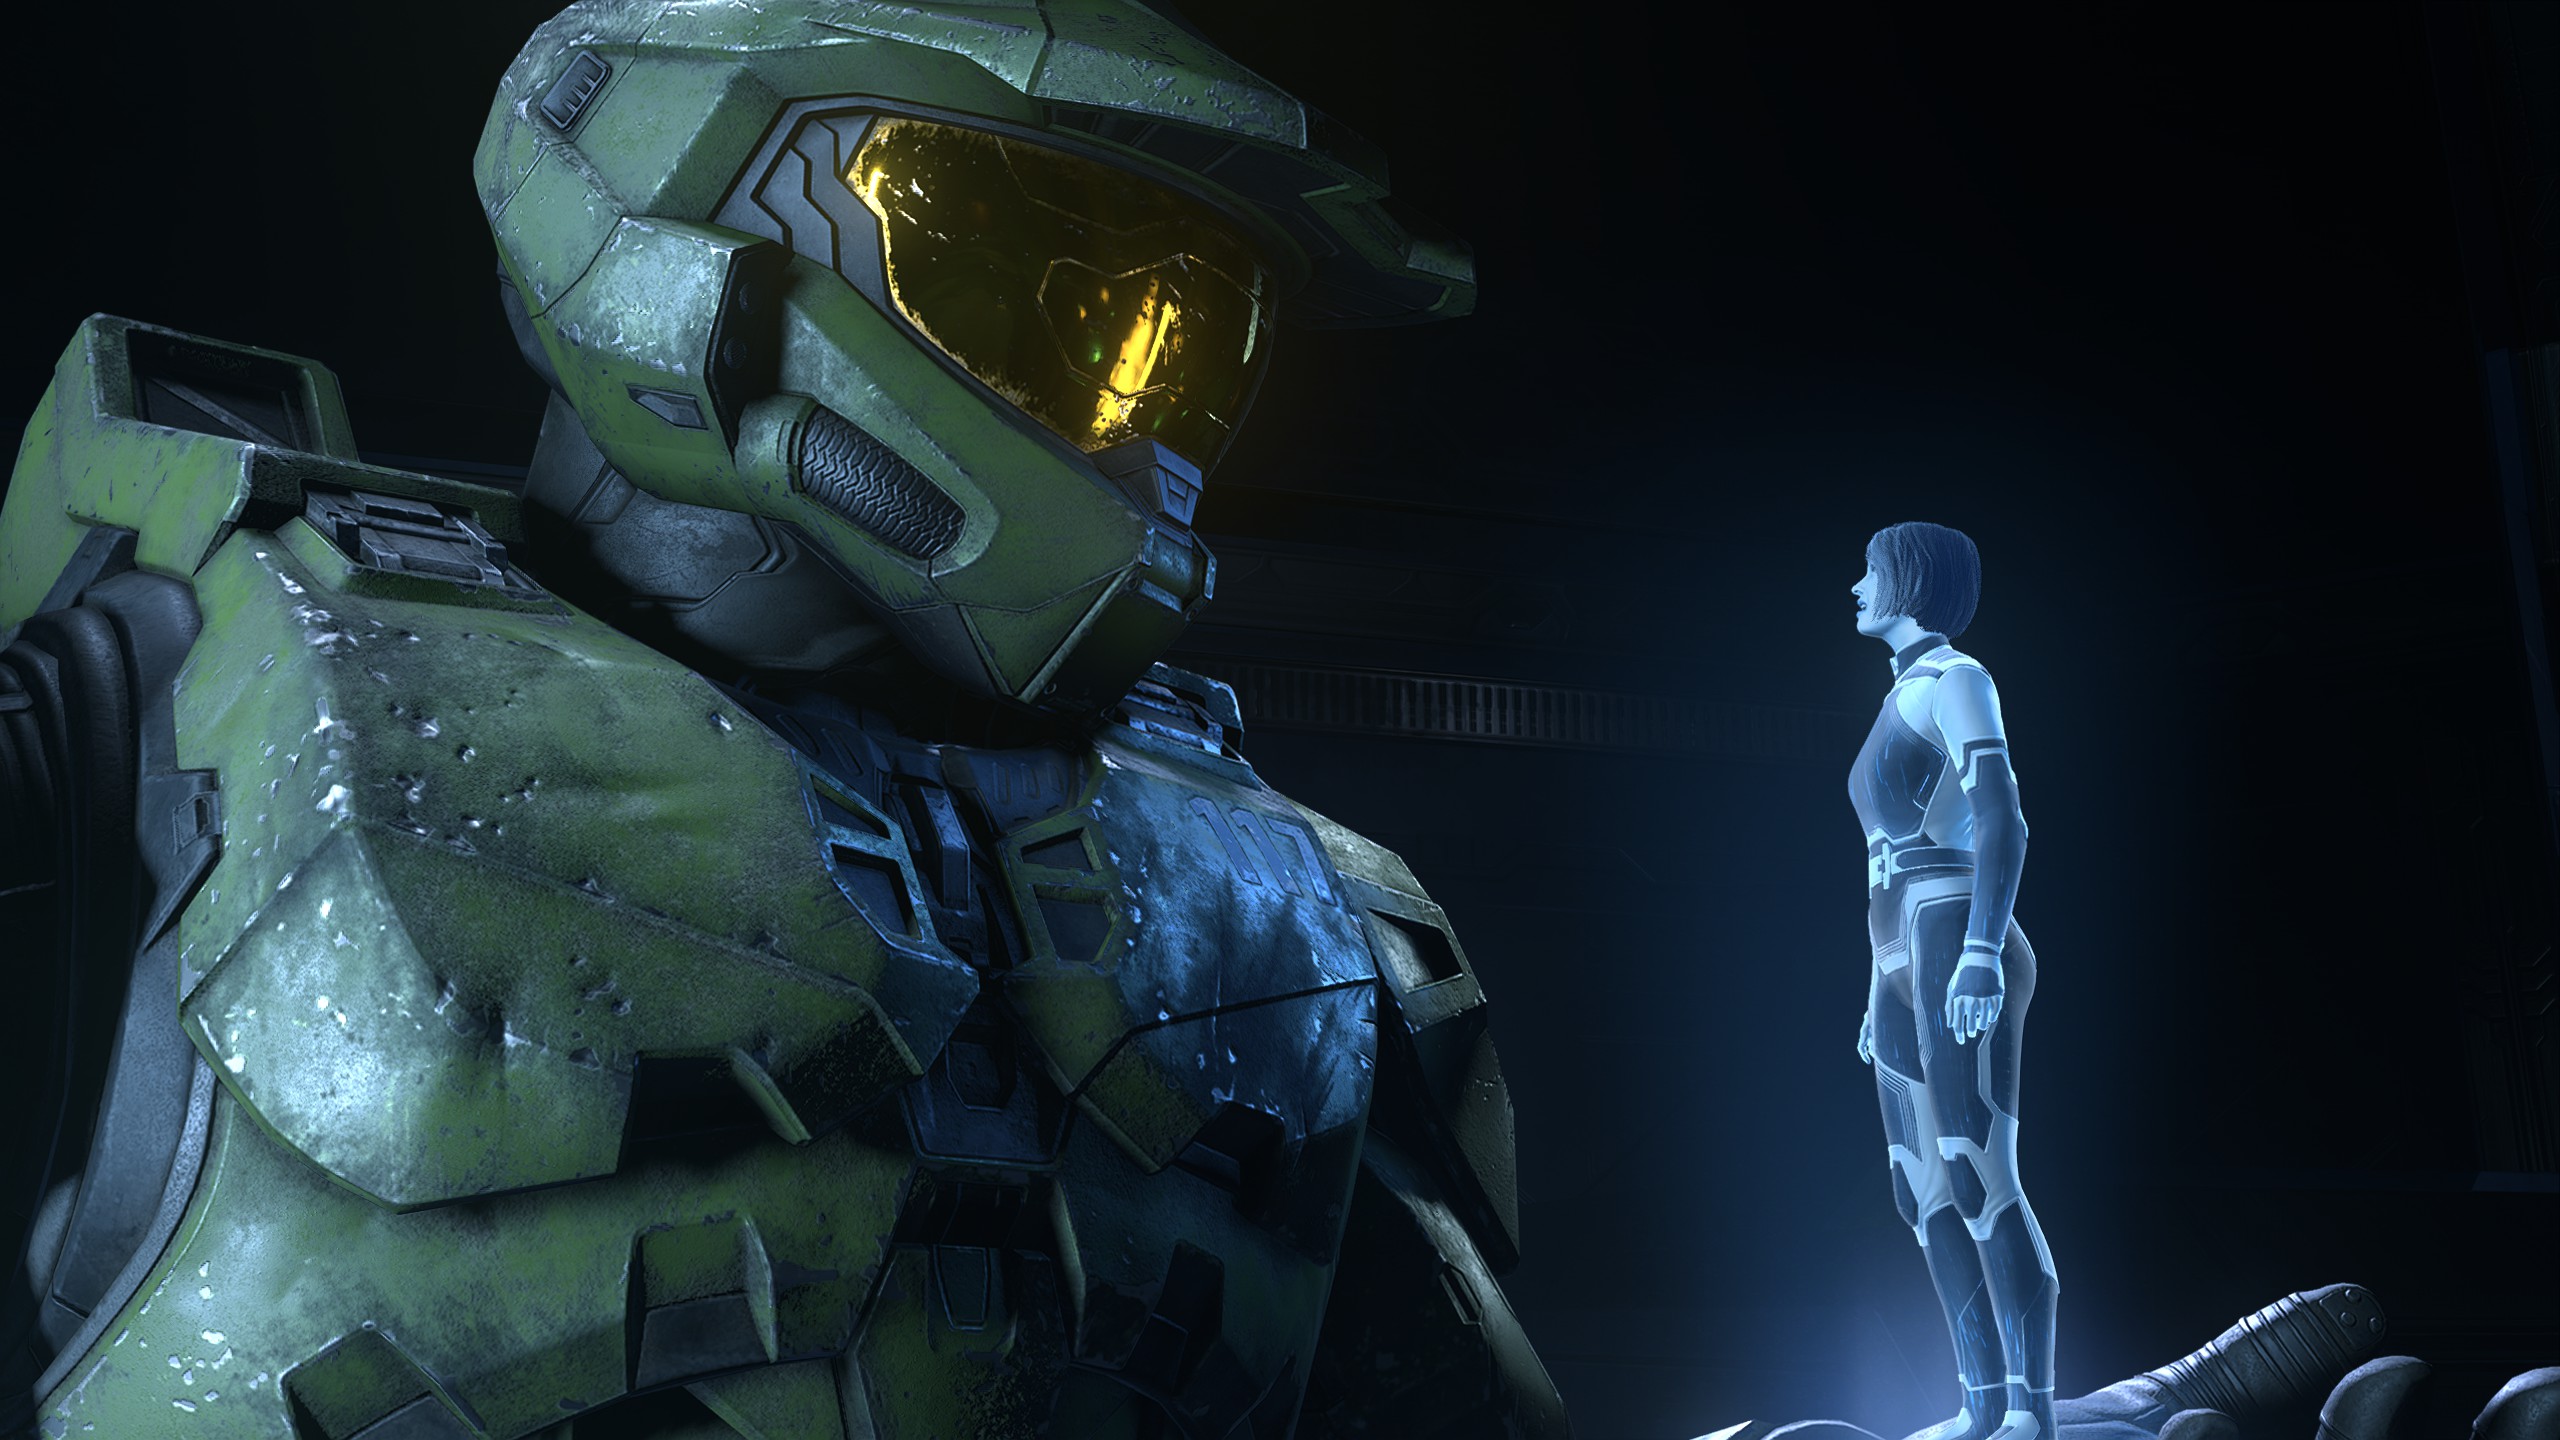 General 2560x1440 Master Chief (Halo) Halo Infinite Zeta Halo video games The Weapon (Halo) video game characters